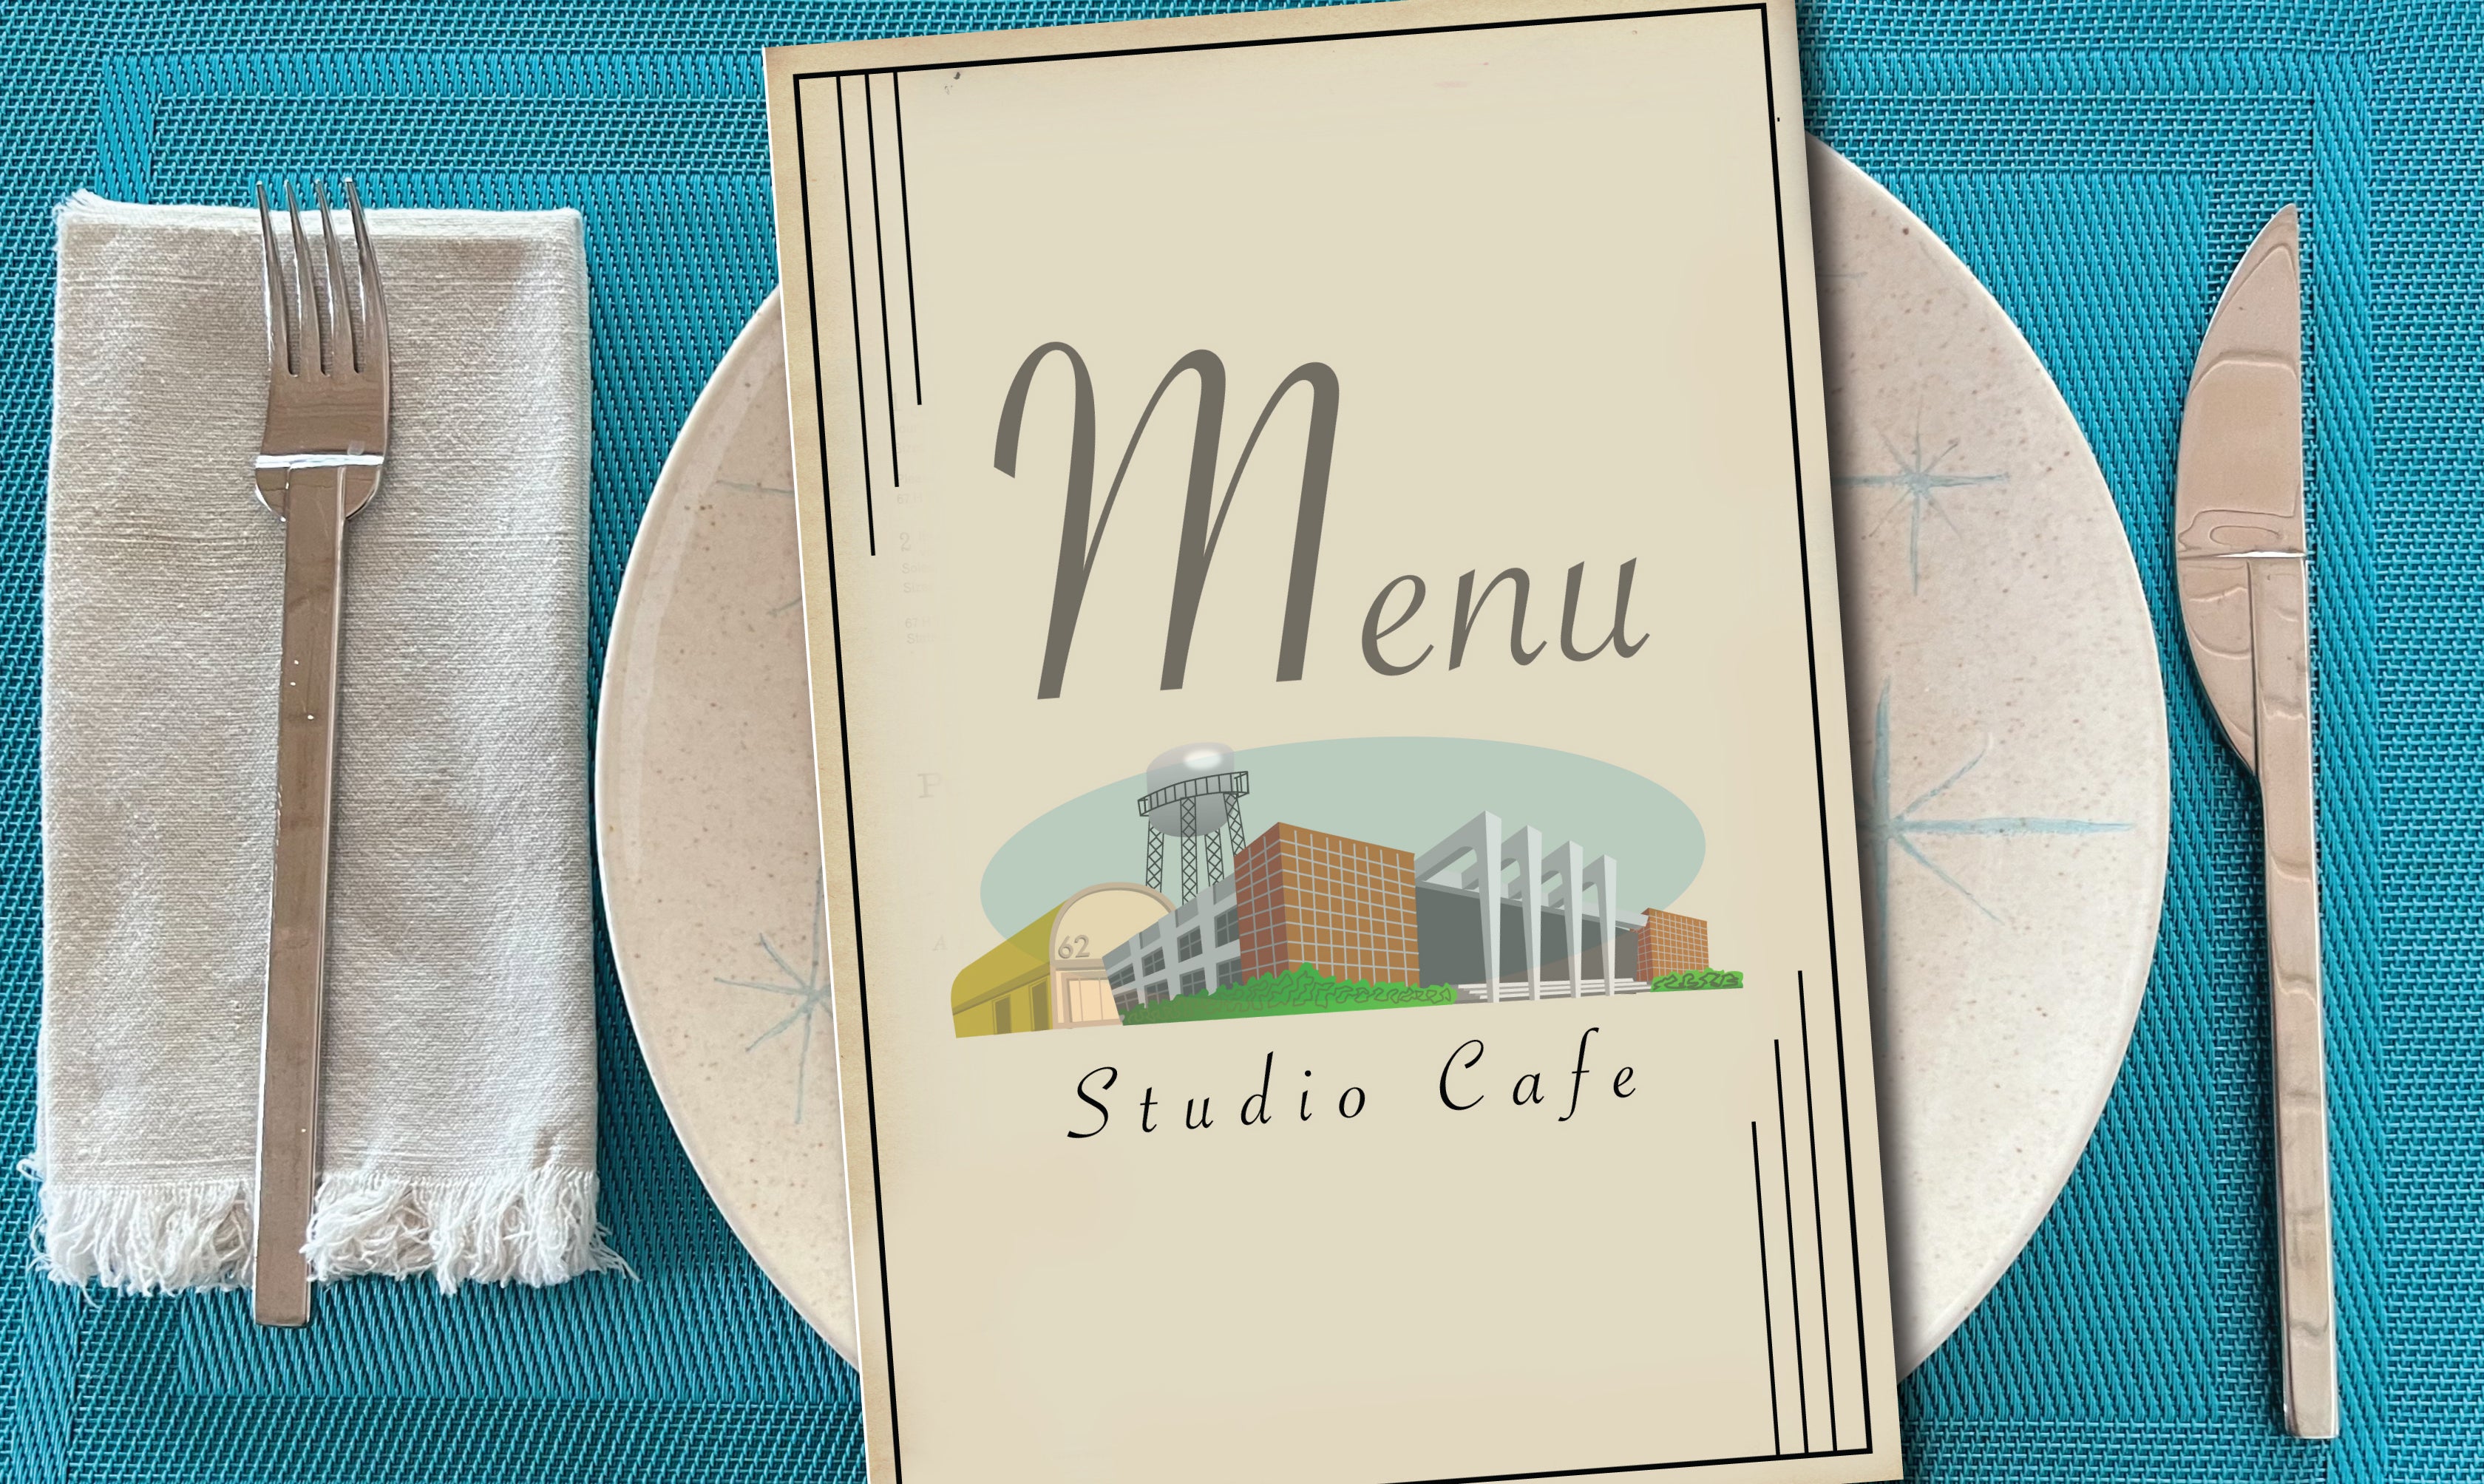 Image shows a place setting with a plate, napkin, knife and fork. On the plate is a menu, which shows an image of a studio, and "Studio Cafe" below.